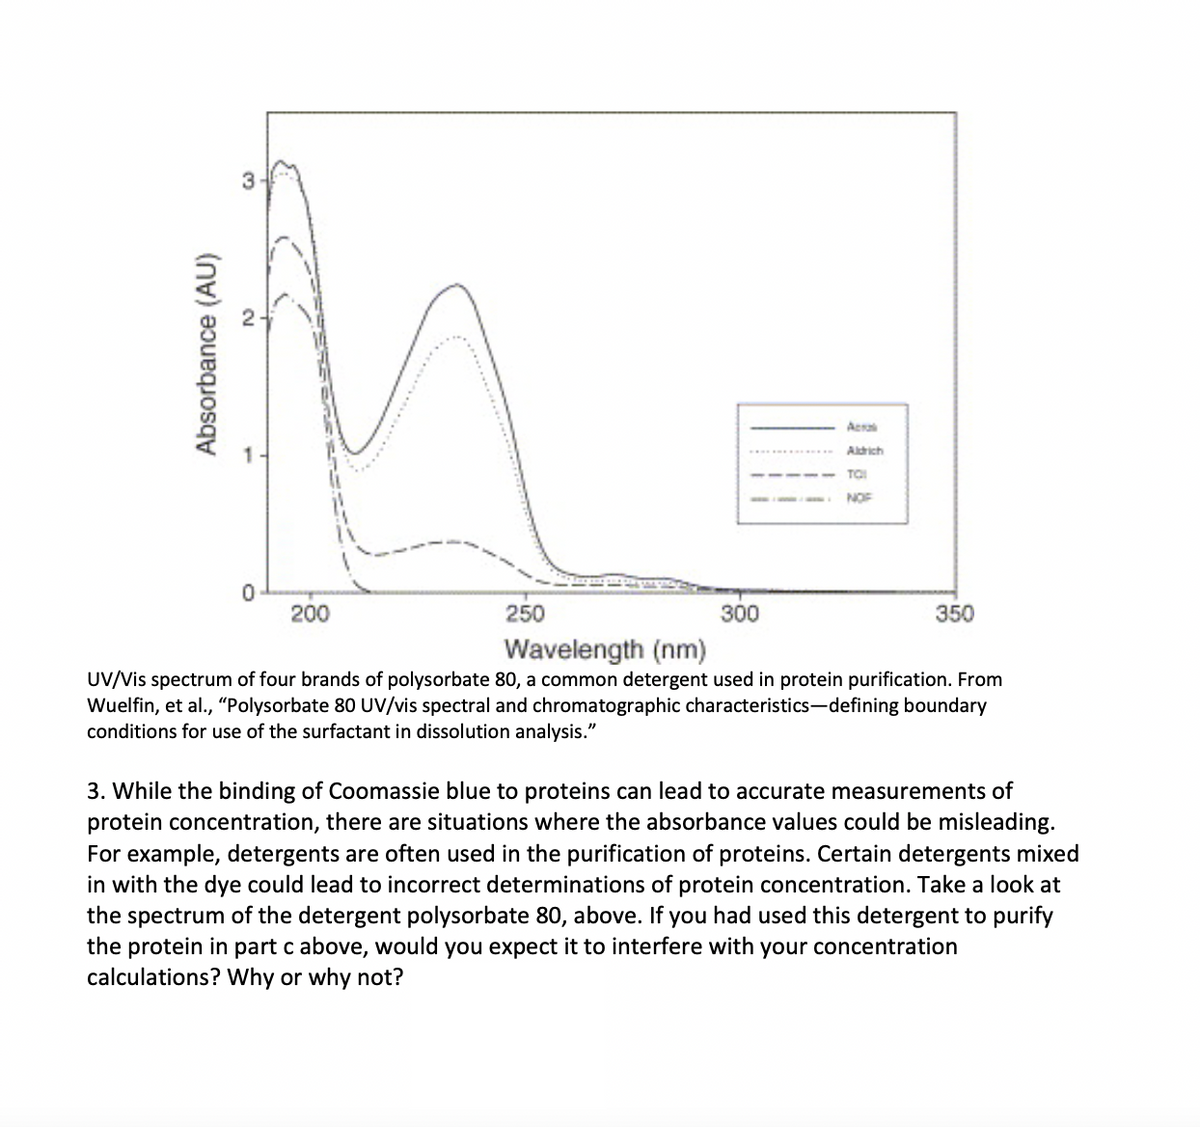 3
Acra
Alrich
TOI
NOF
200
250
300
350
Wavelength (nm)
UV/Vis spectrum of four brands of polysorbate 80, a common detergent used in protein purification. From
Wuelfin, et al., "Polysorbate 80 UV/vis spectral and chromatographic characteristics-defining boundary
conditions for use of the surfactant in dissolution analysis."
3. While the binding of Coomassie blue to proteins can lead to accurate measurements of
protein concentration, there are situations where the absorbance values could be misleading.
For example, detergents are often used in the purification of proteins. Certain detergents mixed
in with the dye could lead to incorrect determinations of protein concentration. Take a look at
the spectrum of the detergent polysorbate 80, above. If you had used this detergent to purify
the protein in part c above, would you expect it to interfere with your concentration
calculations? Why or why not?
Absorbance (AU)
